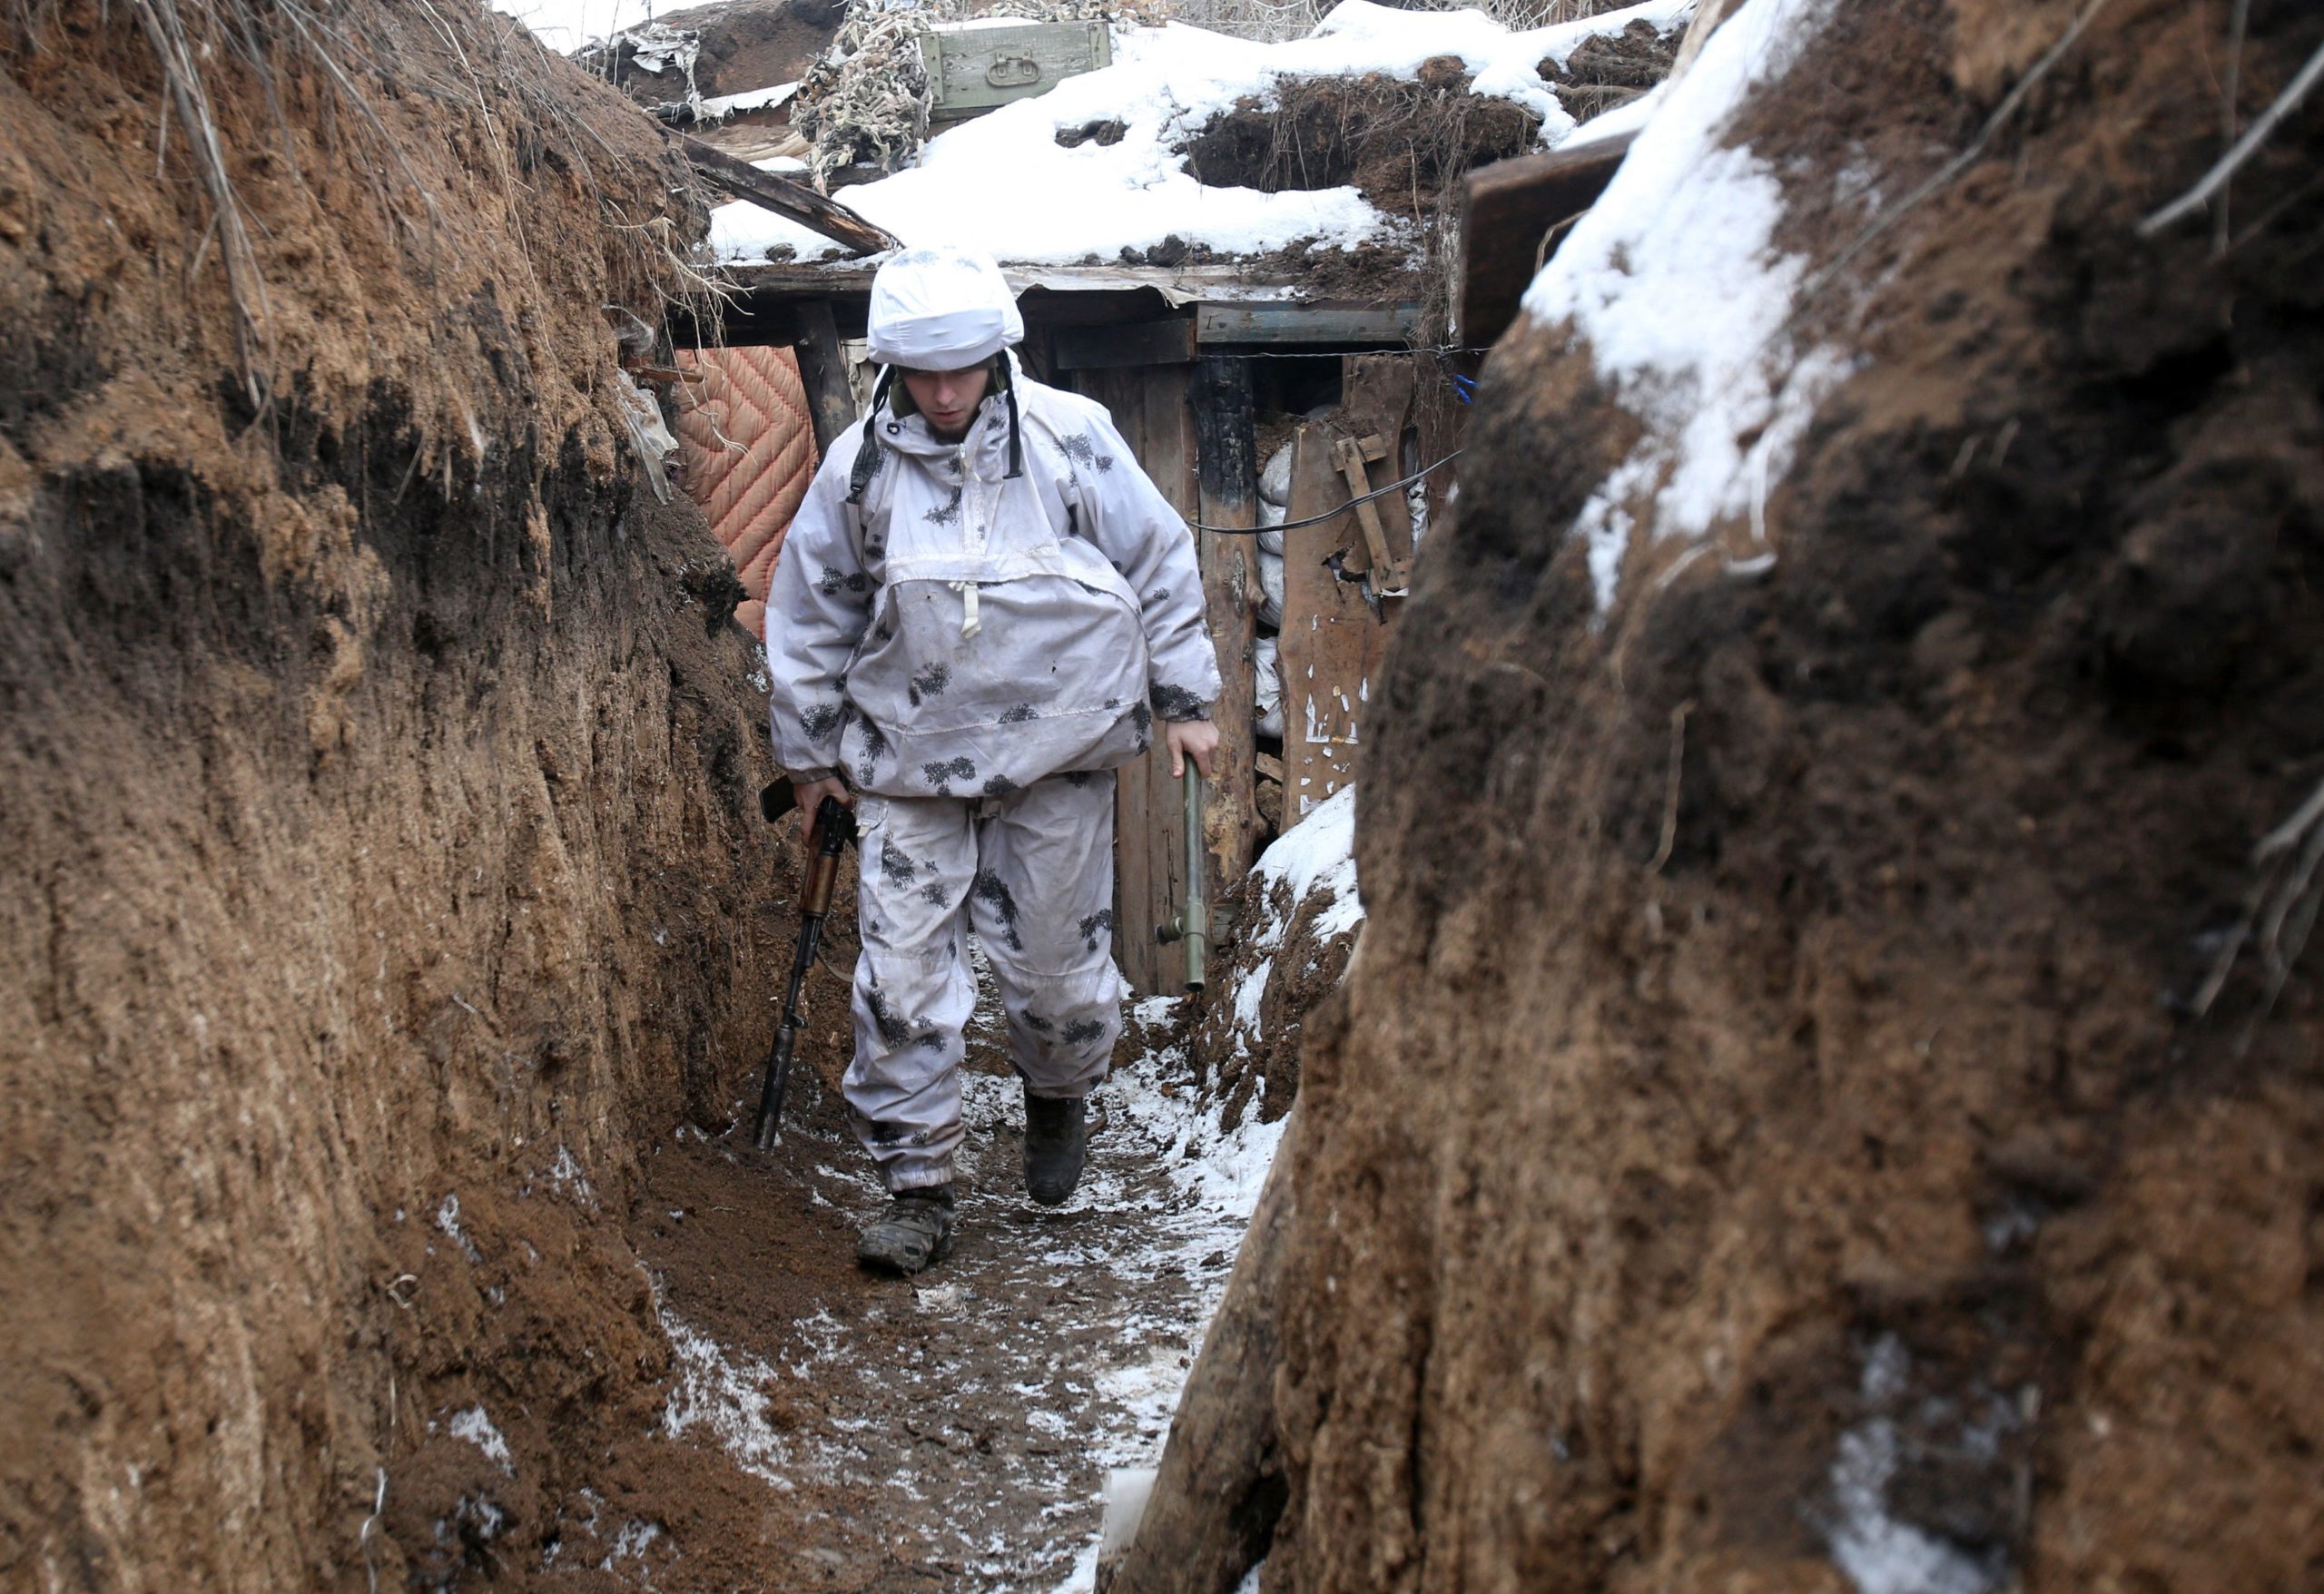 TOPSHOT - An Ukrainian serviceman walks along a snow covered trench on the frontline with the Russia-backed separatists near Verkhnetoretskoye village, in the Donetsk region on February 1, 2022. (Photo by Anatolii STEPANOV / AFP) (Photo by ANATOLII STEPANOV/AFP via Getty Images)